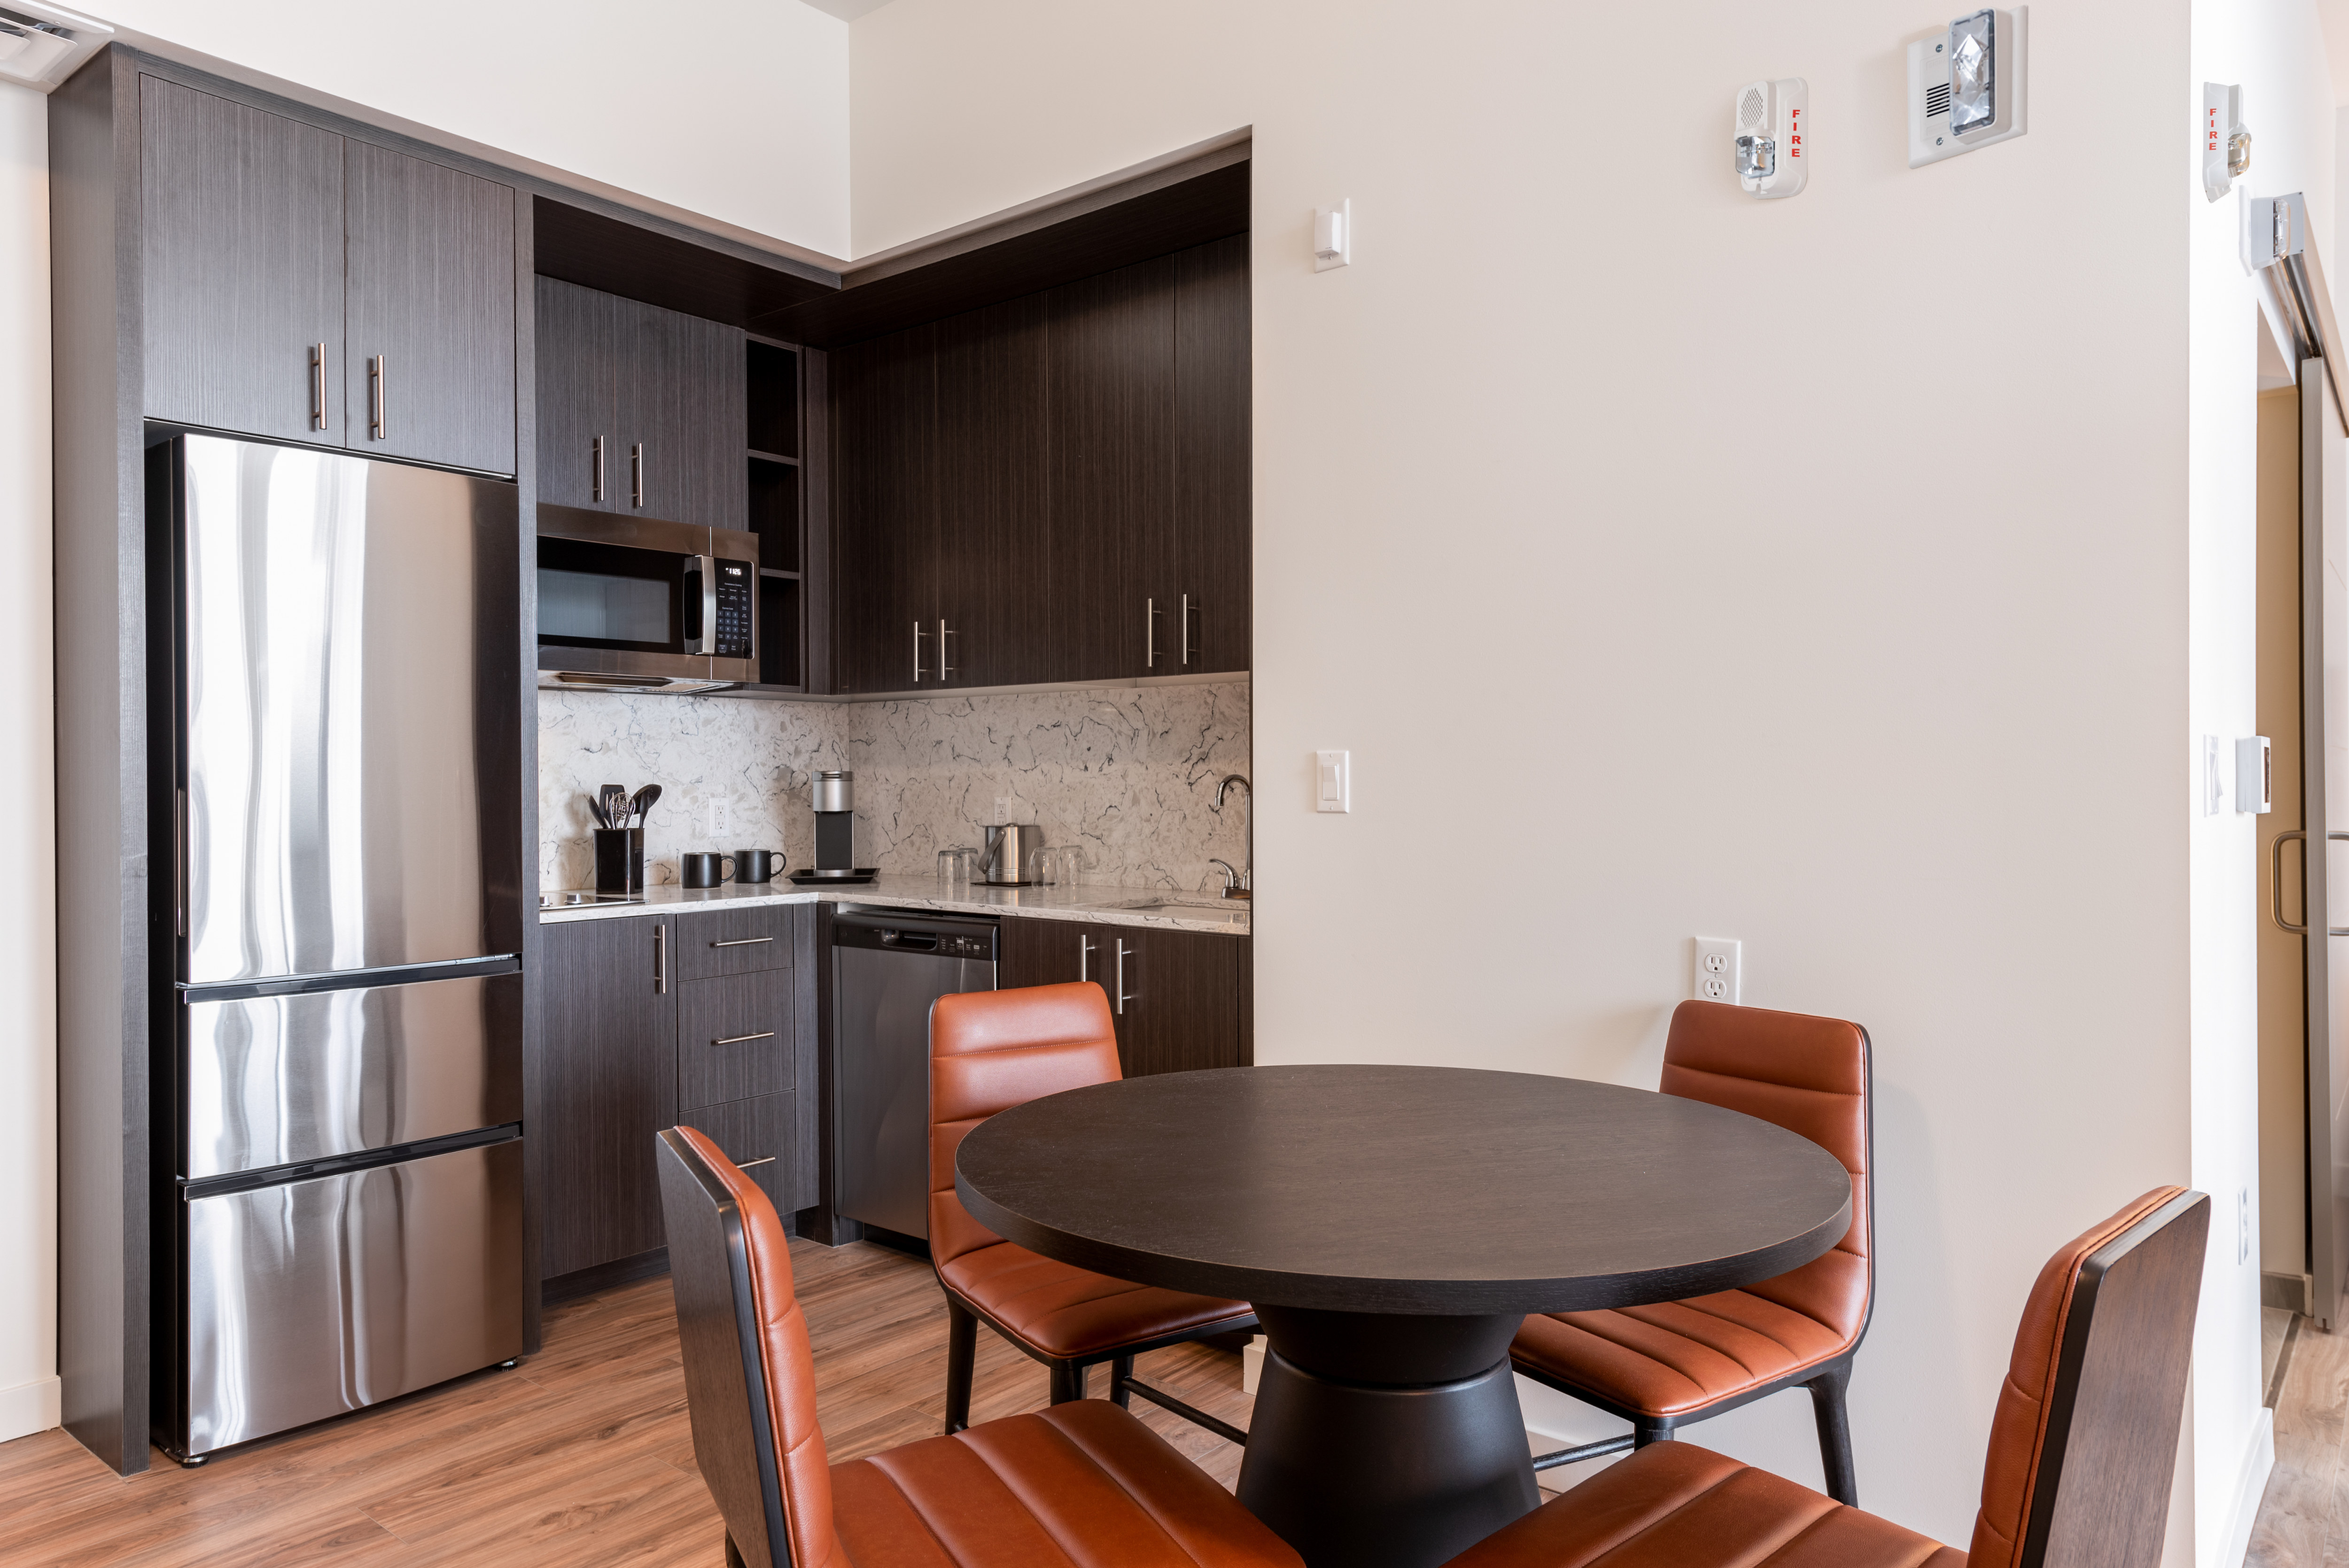 Suite Dining Area and Kitchen with Stainless Appliances